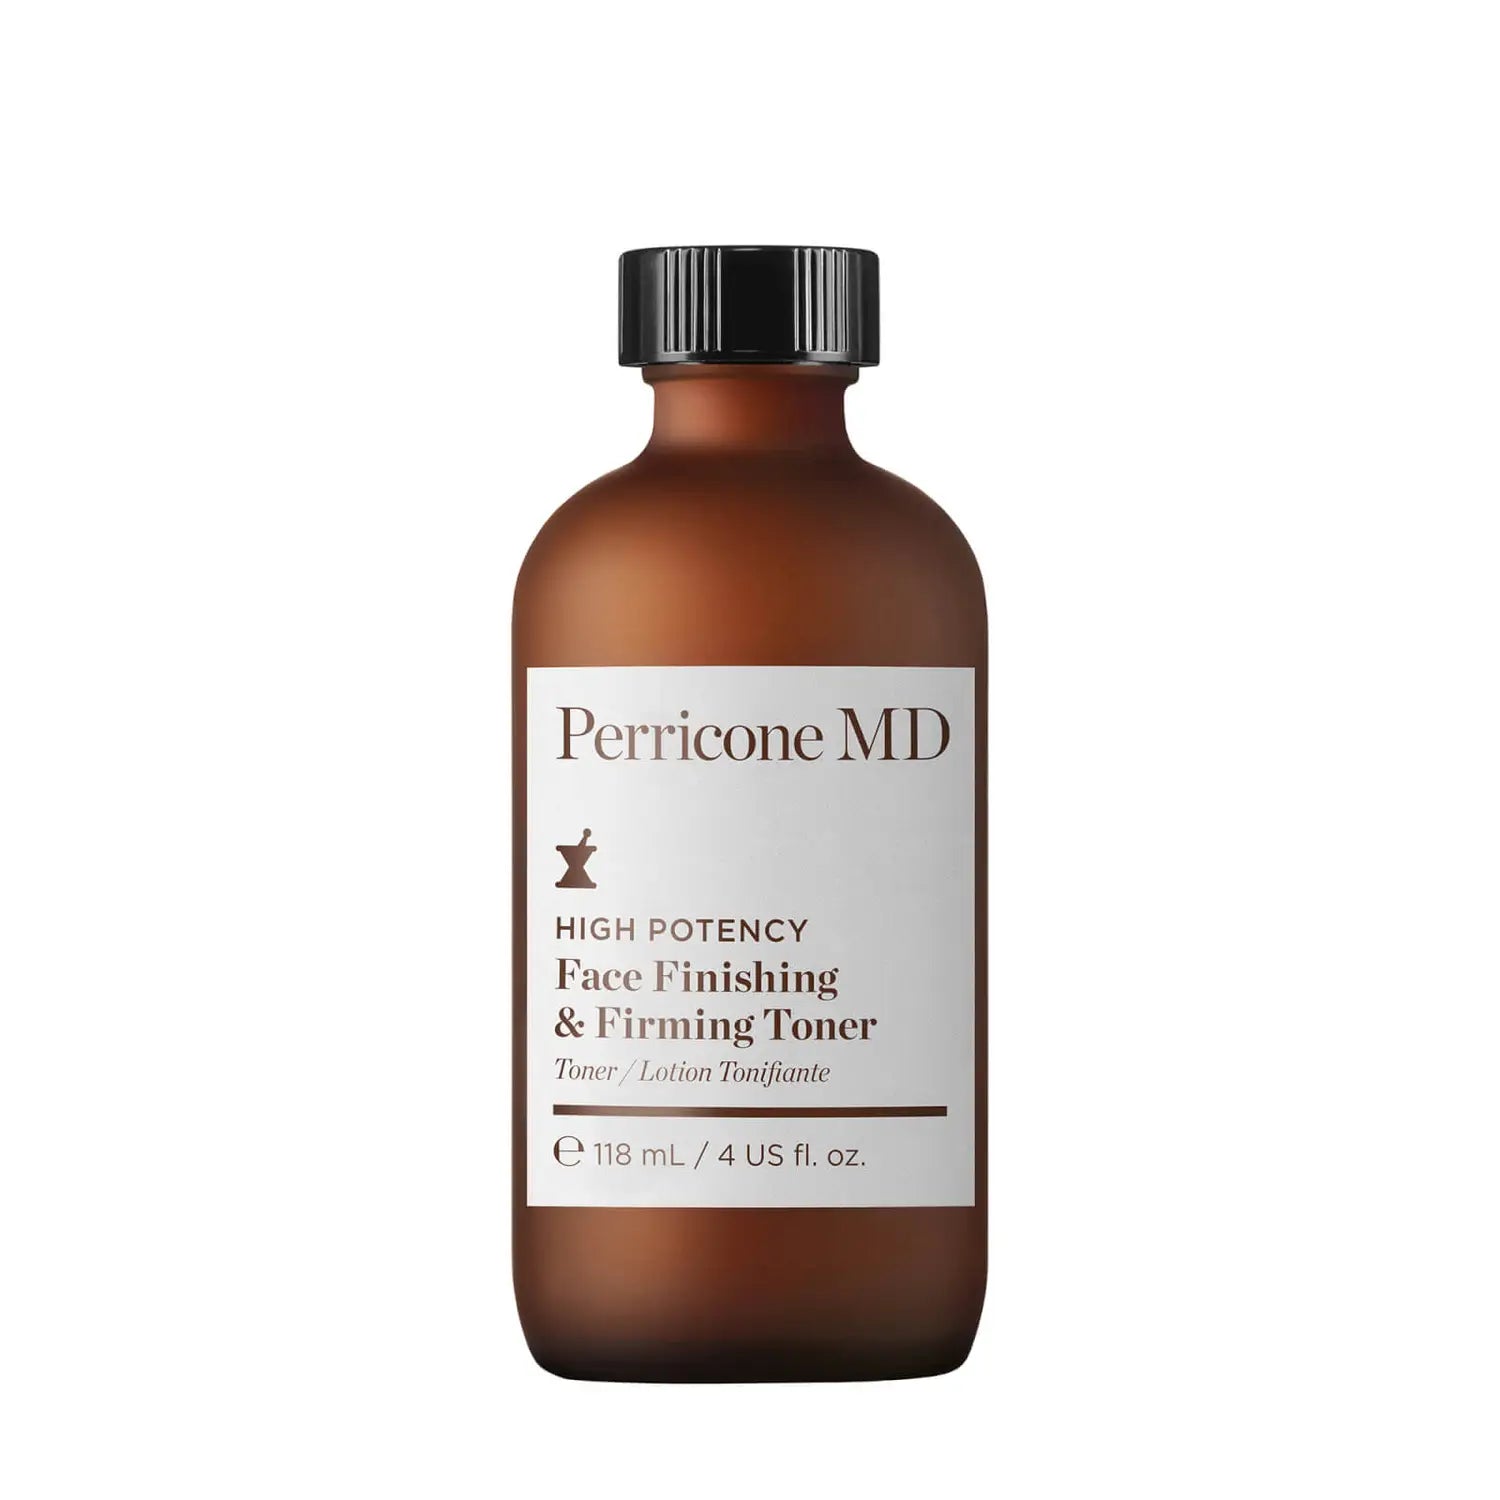 Perricone MD High Potency Face Finishing & Firming Toner 4oz